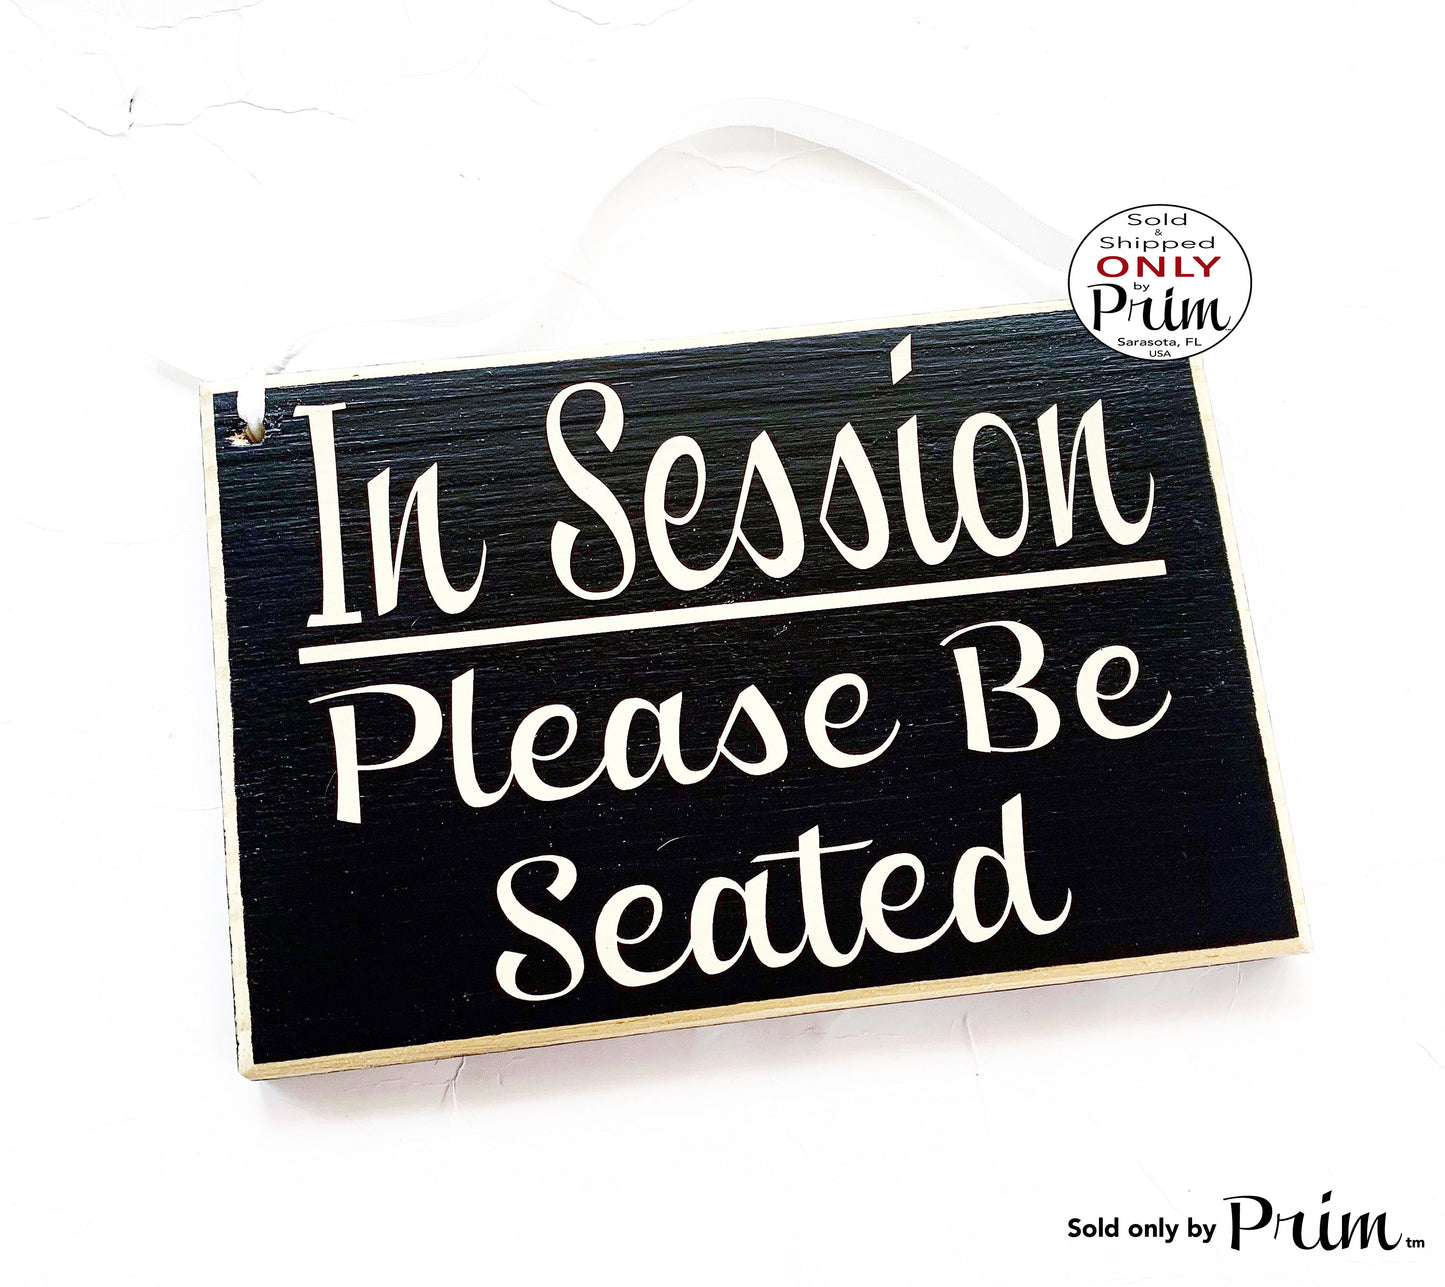 8x6 In Session Please Be Seated Custom Wood Sign | Do Not Disturb In A Meeting Treatment In Progress Conference Spa Office Door Wall Plaque